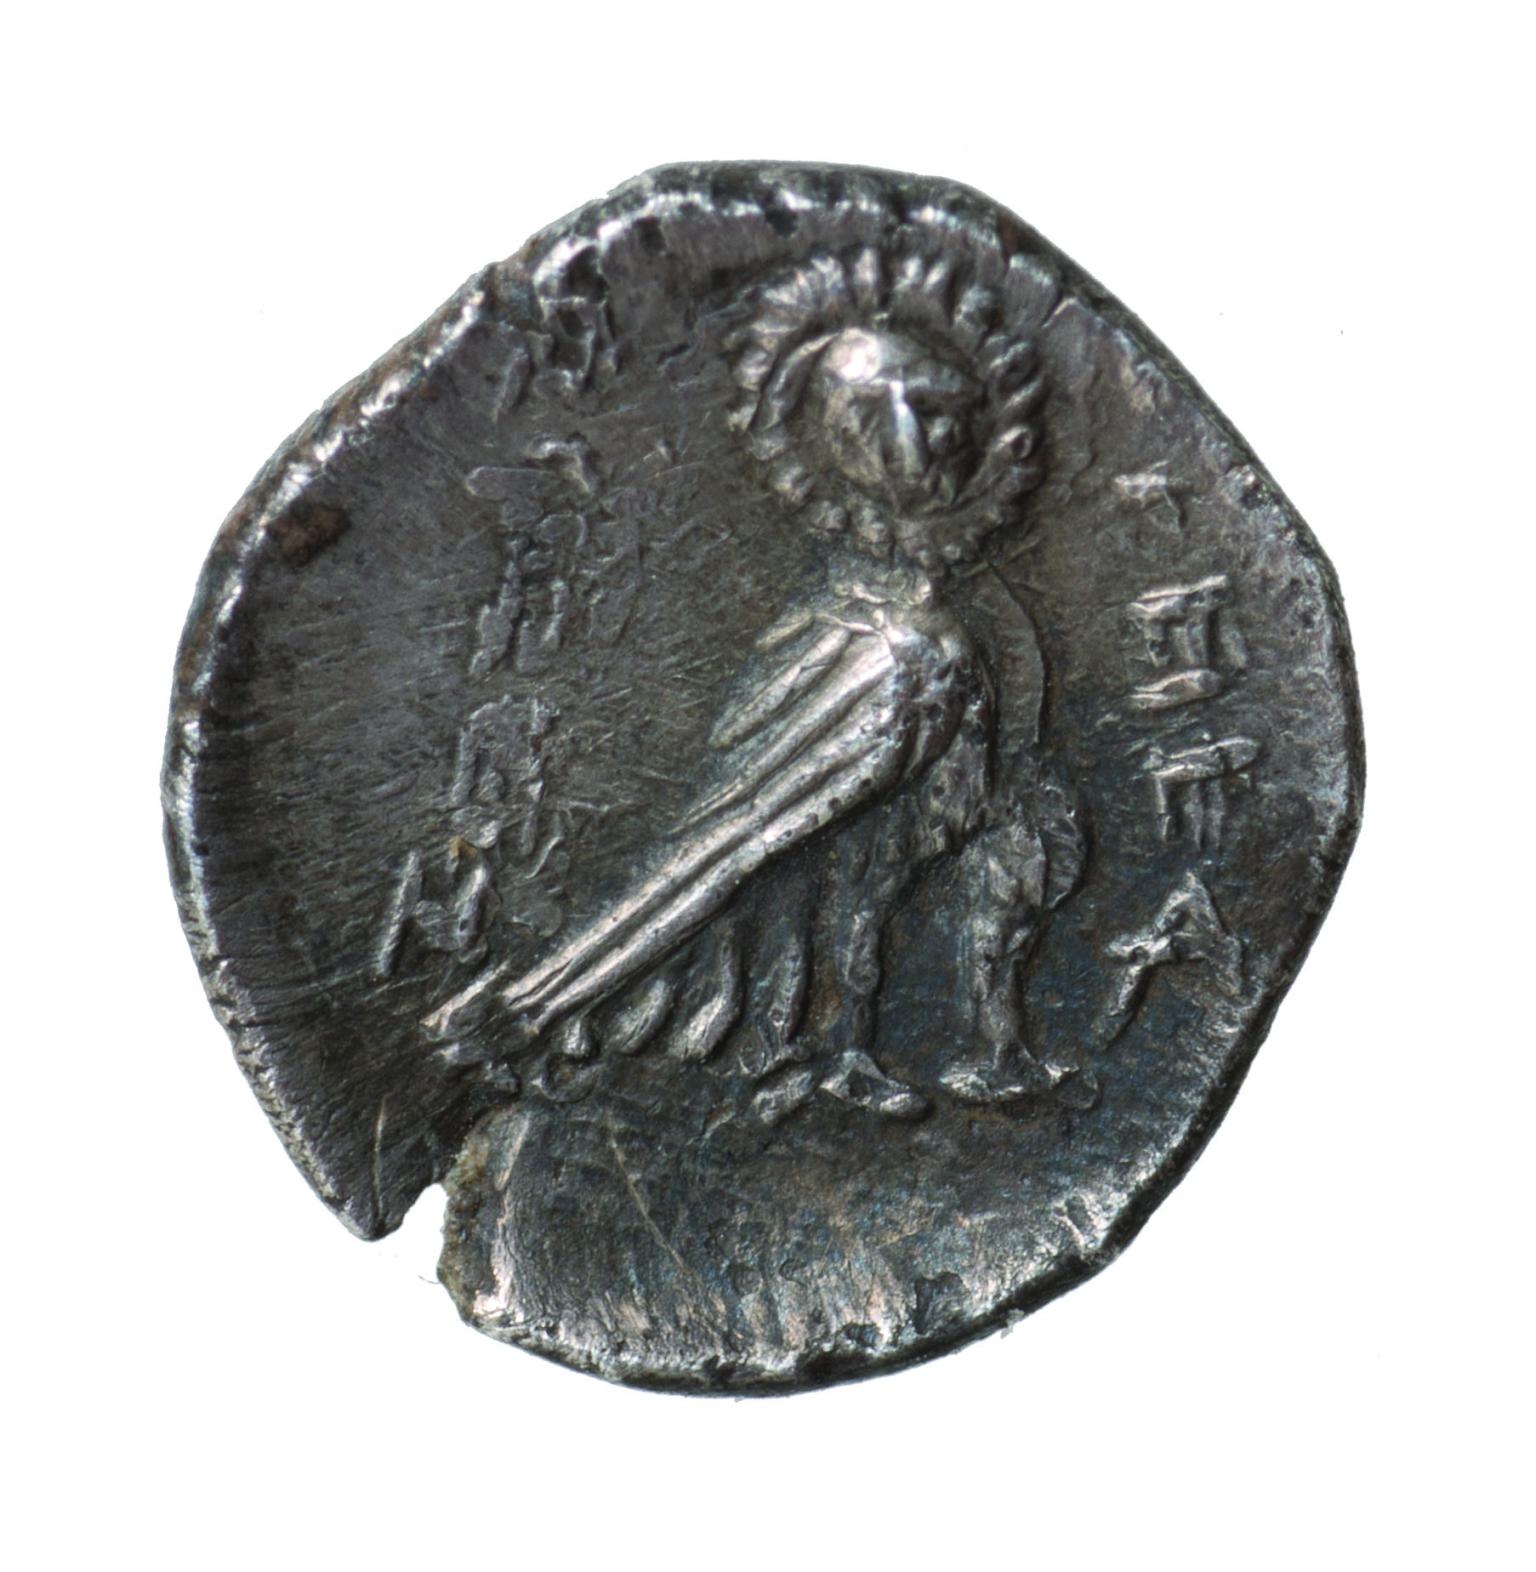 Coin with image of owl with body facing right and face turned towards the viewer and Hebrew inscription.